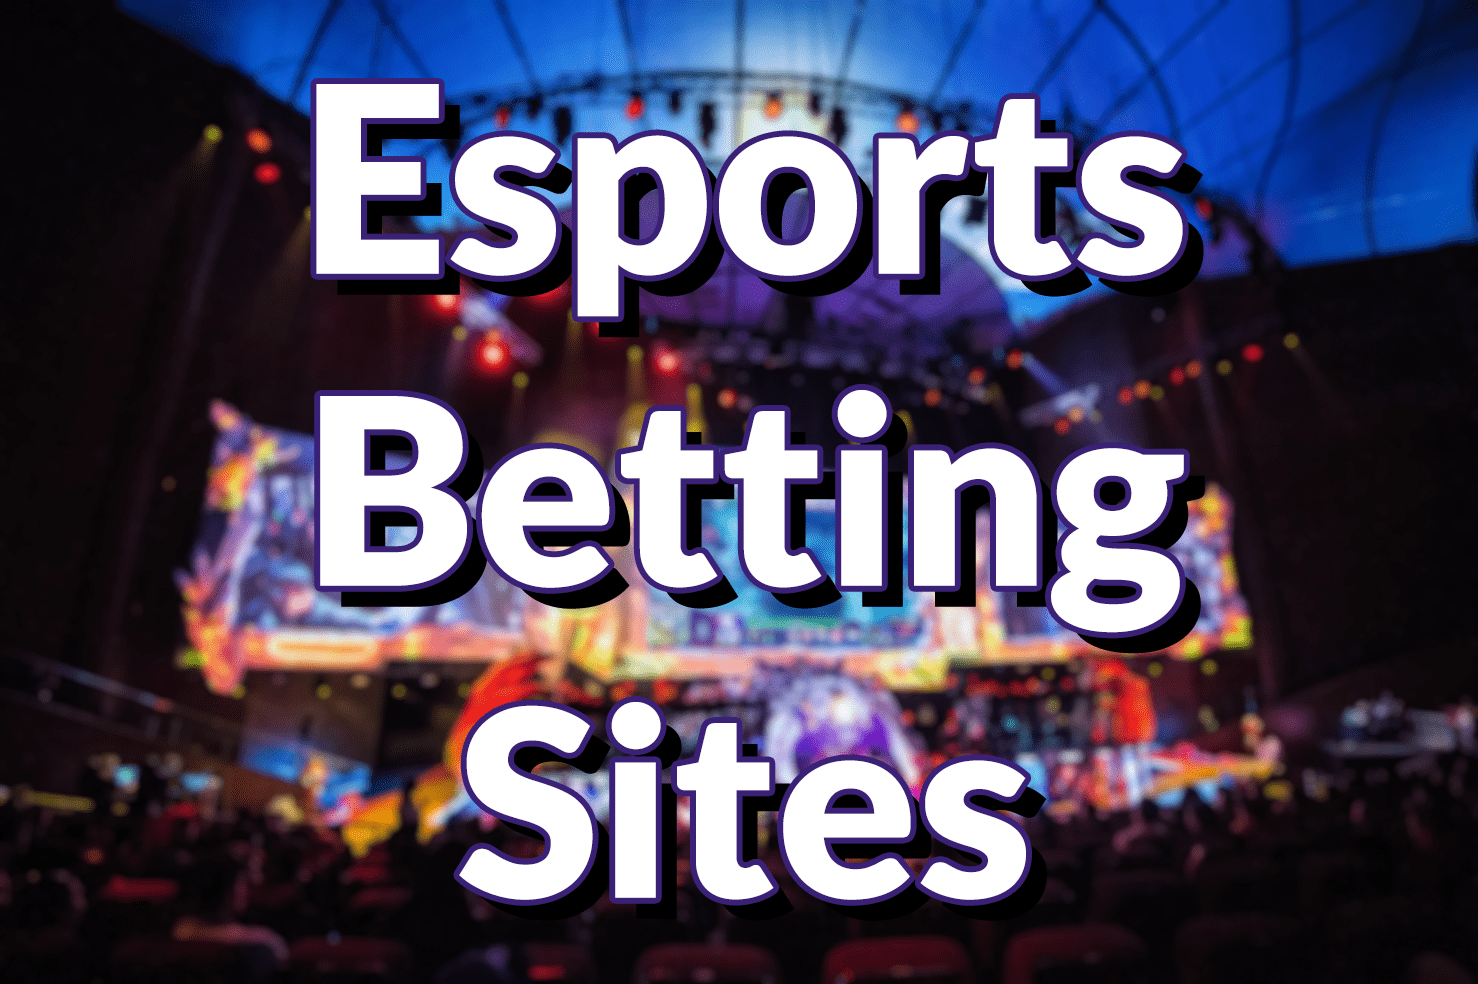 Know what is special about an esports casino